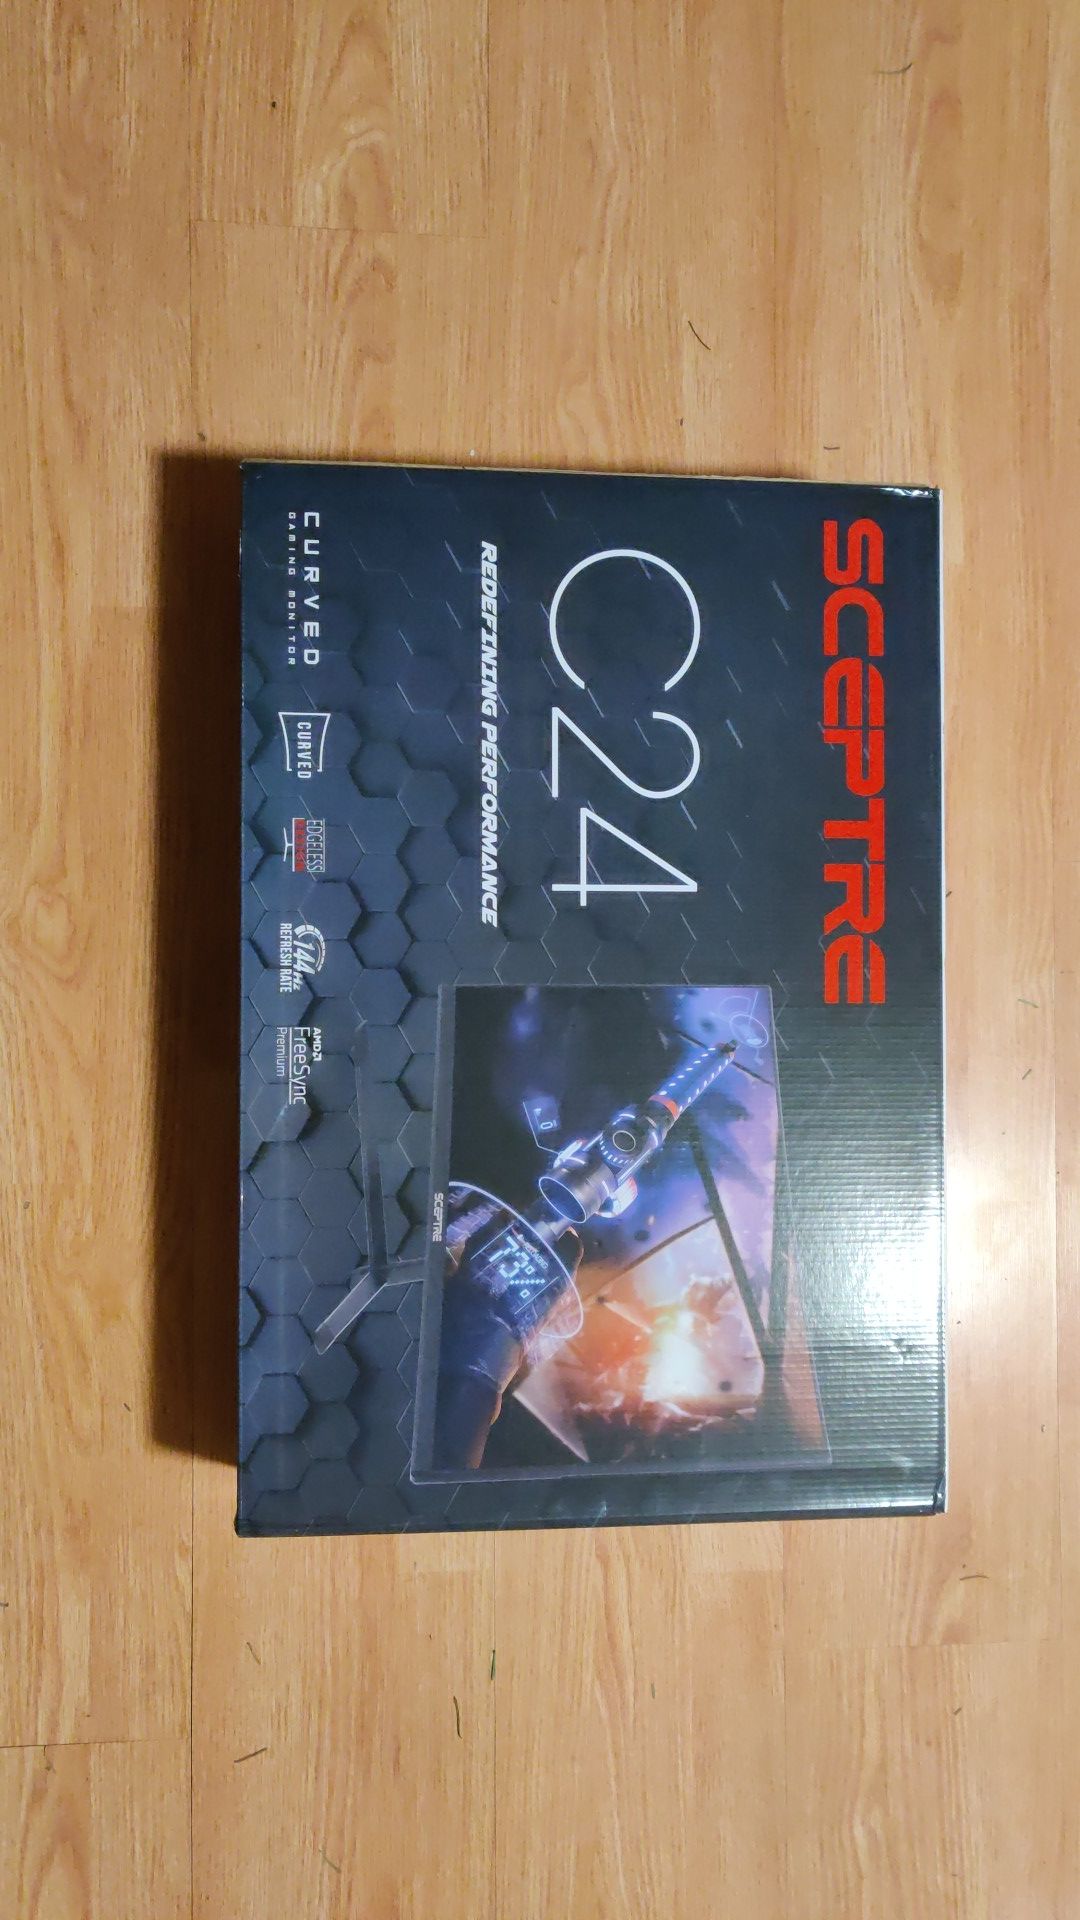 Sceptre C24 Curved Gaming Monitor 144Hrtz Display